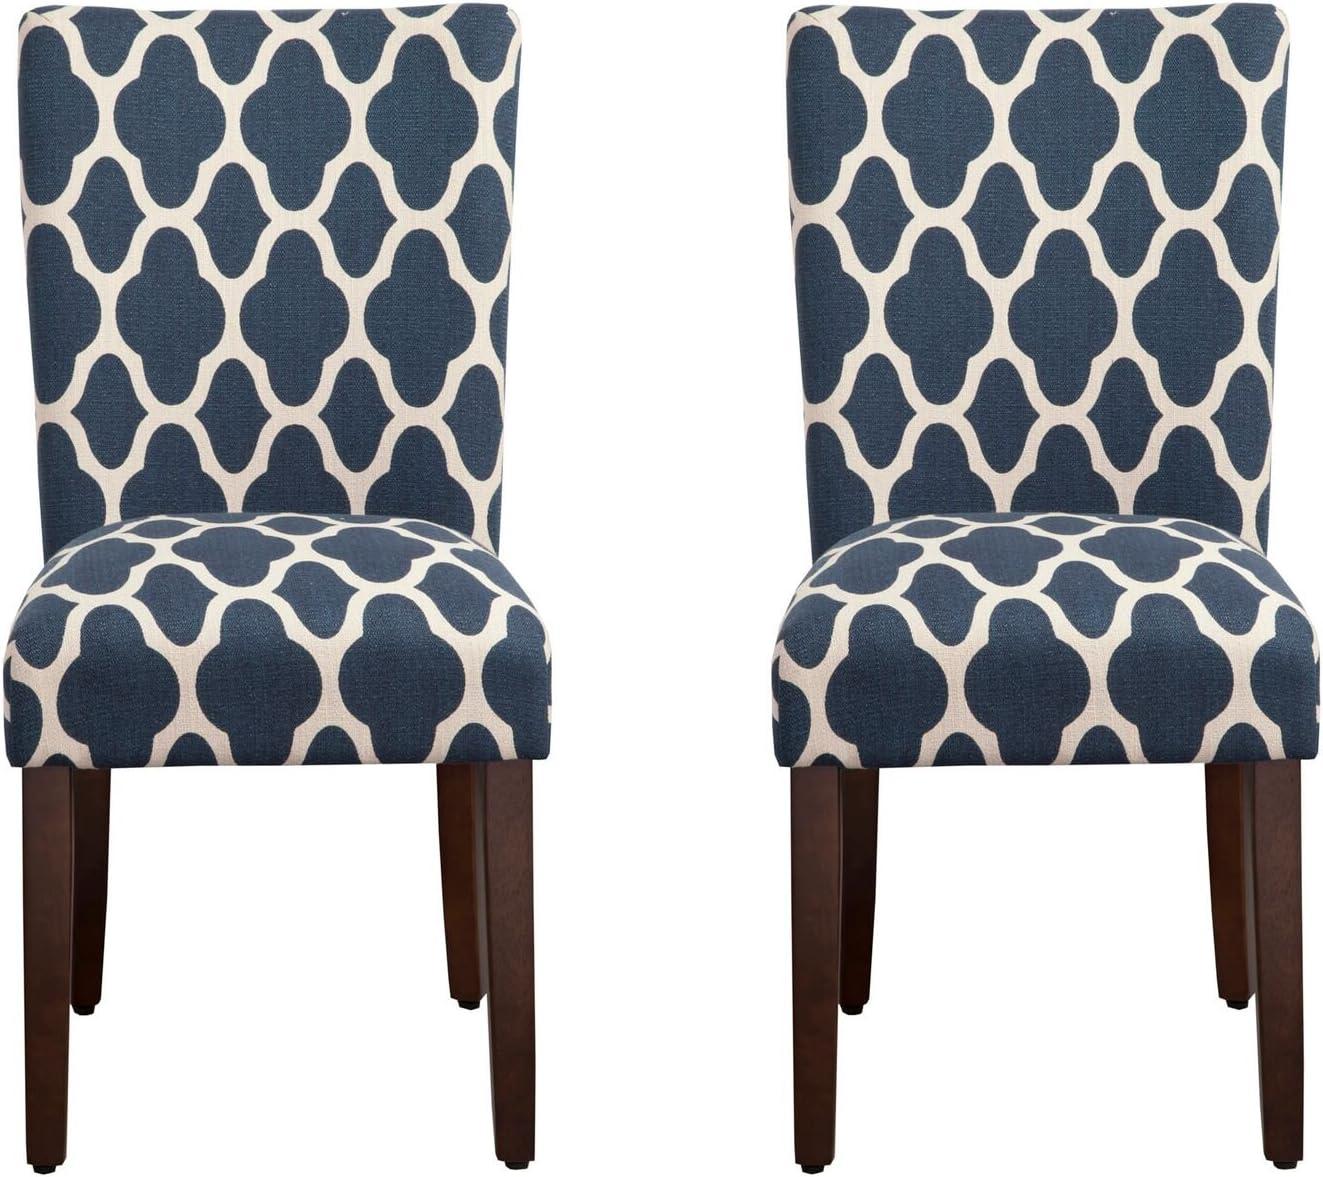 High Parsons Side Chair in Geo Brights Navy Blue with Ebony Wood Legs